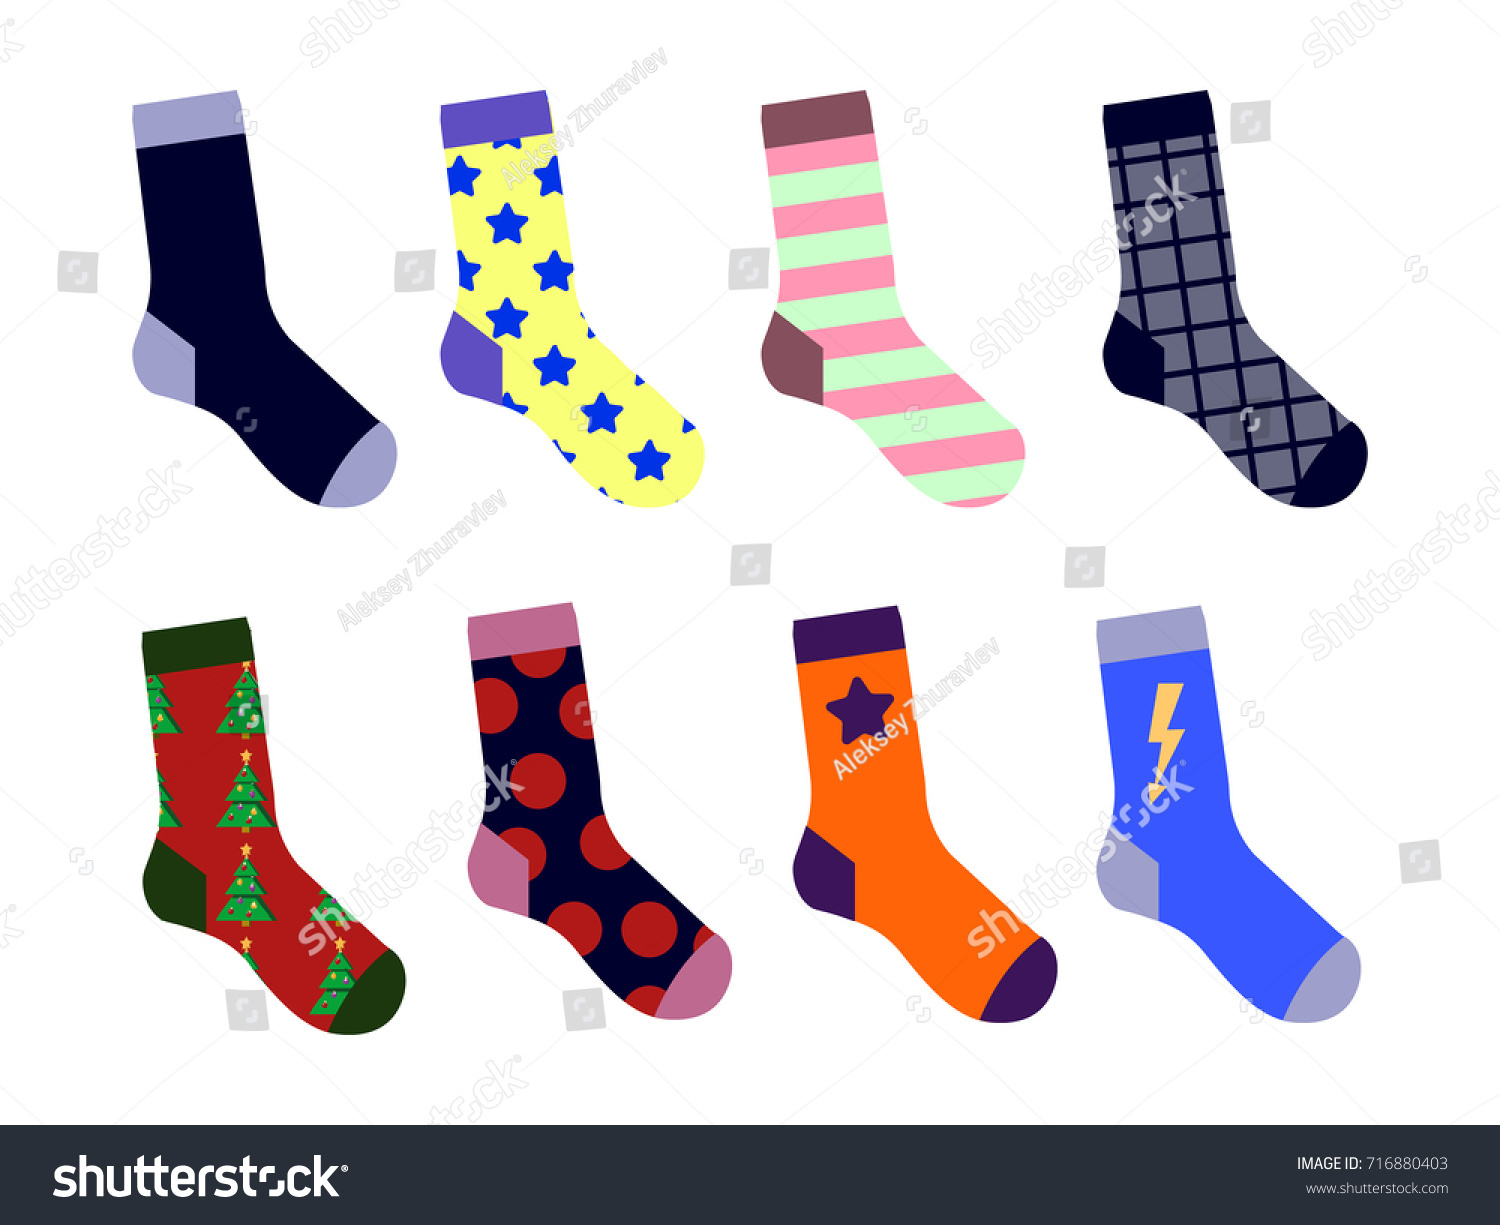 Colorful Socks Set Picture Flat Design Stock Vector 716880403 ...